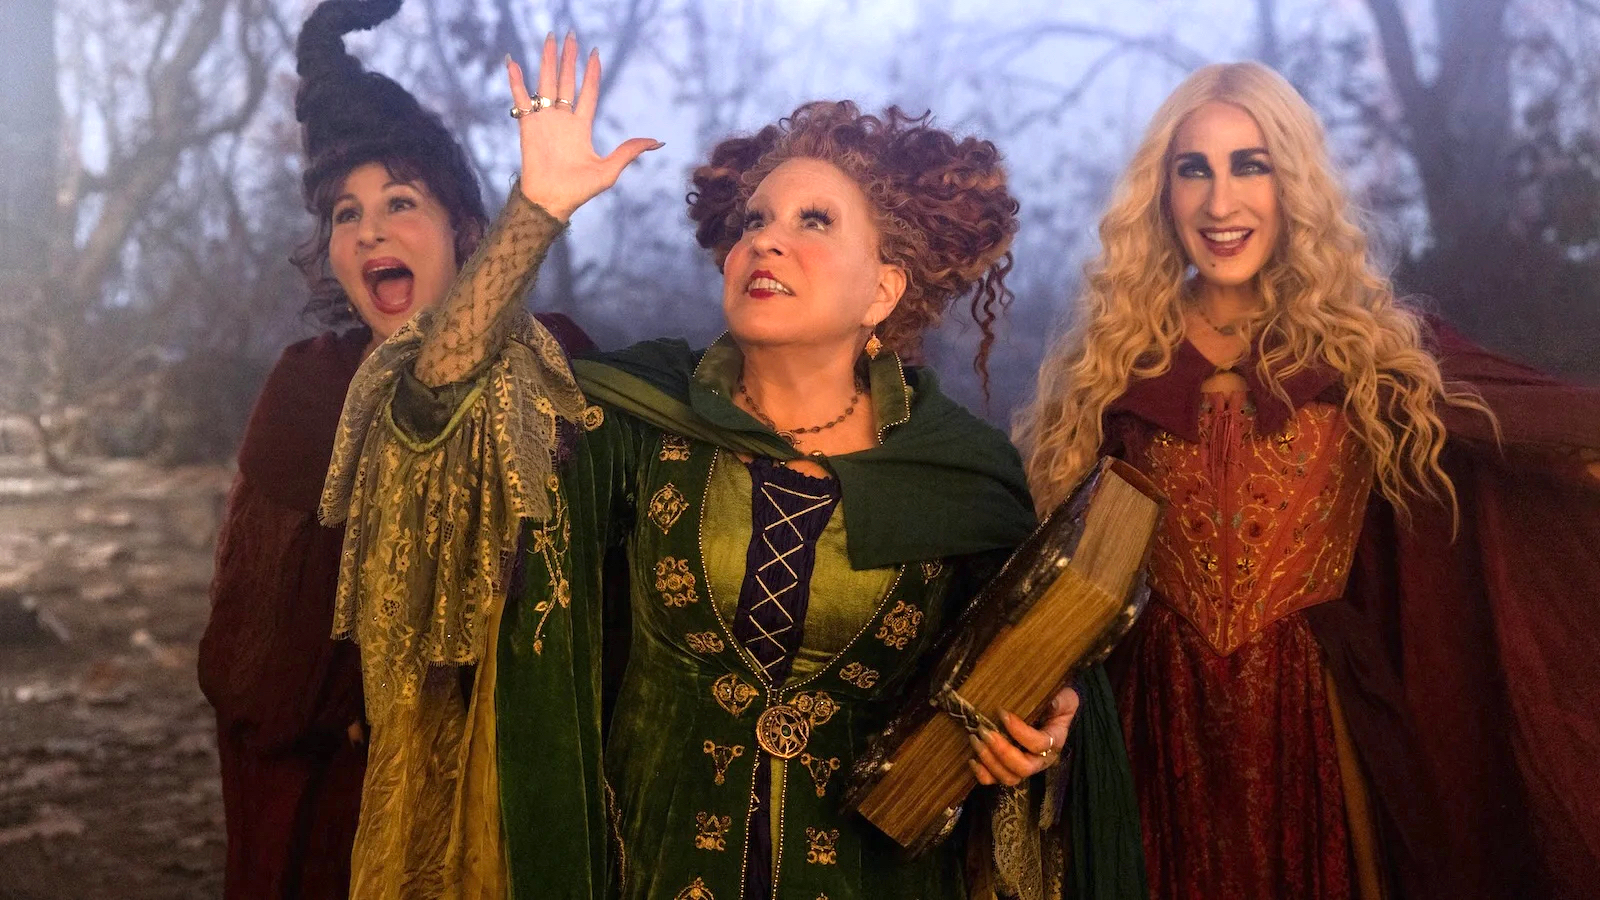 This Darker Take on ‘Hocus Pocus’ Would Have Cast a Very Different